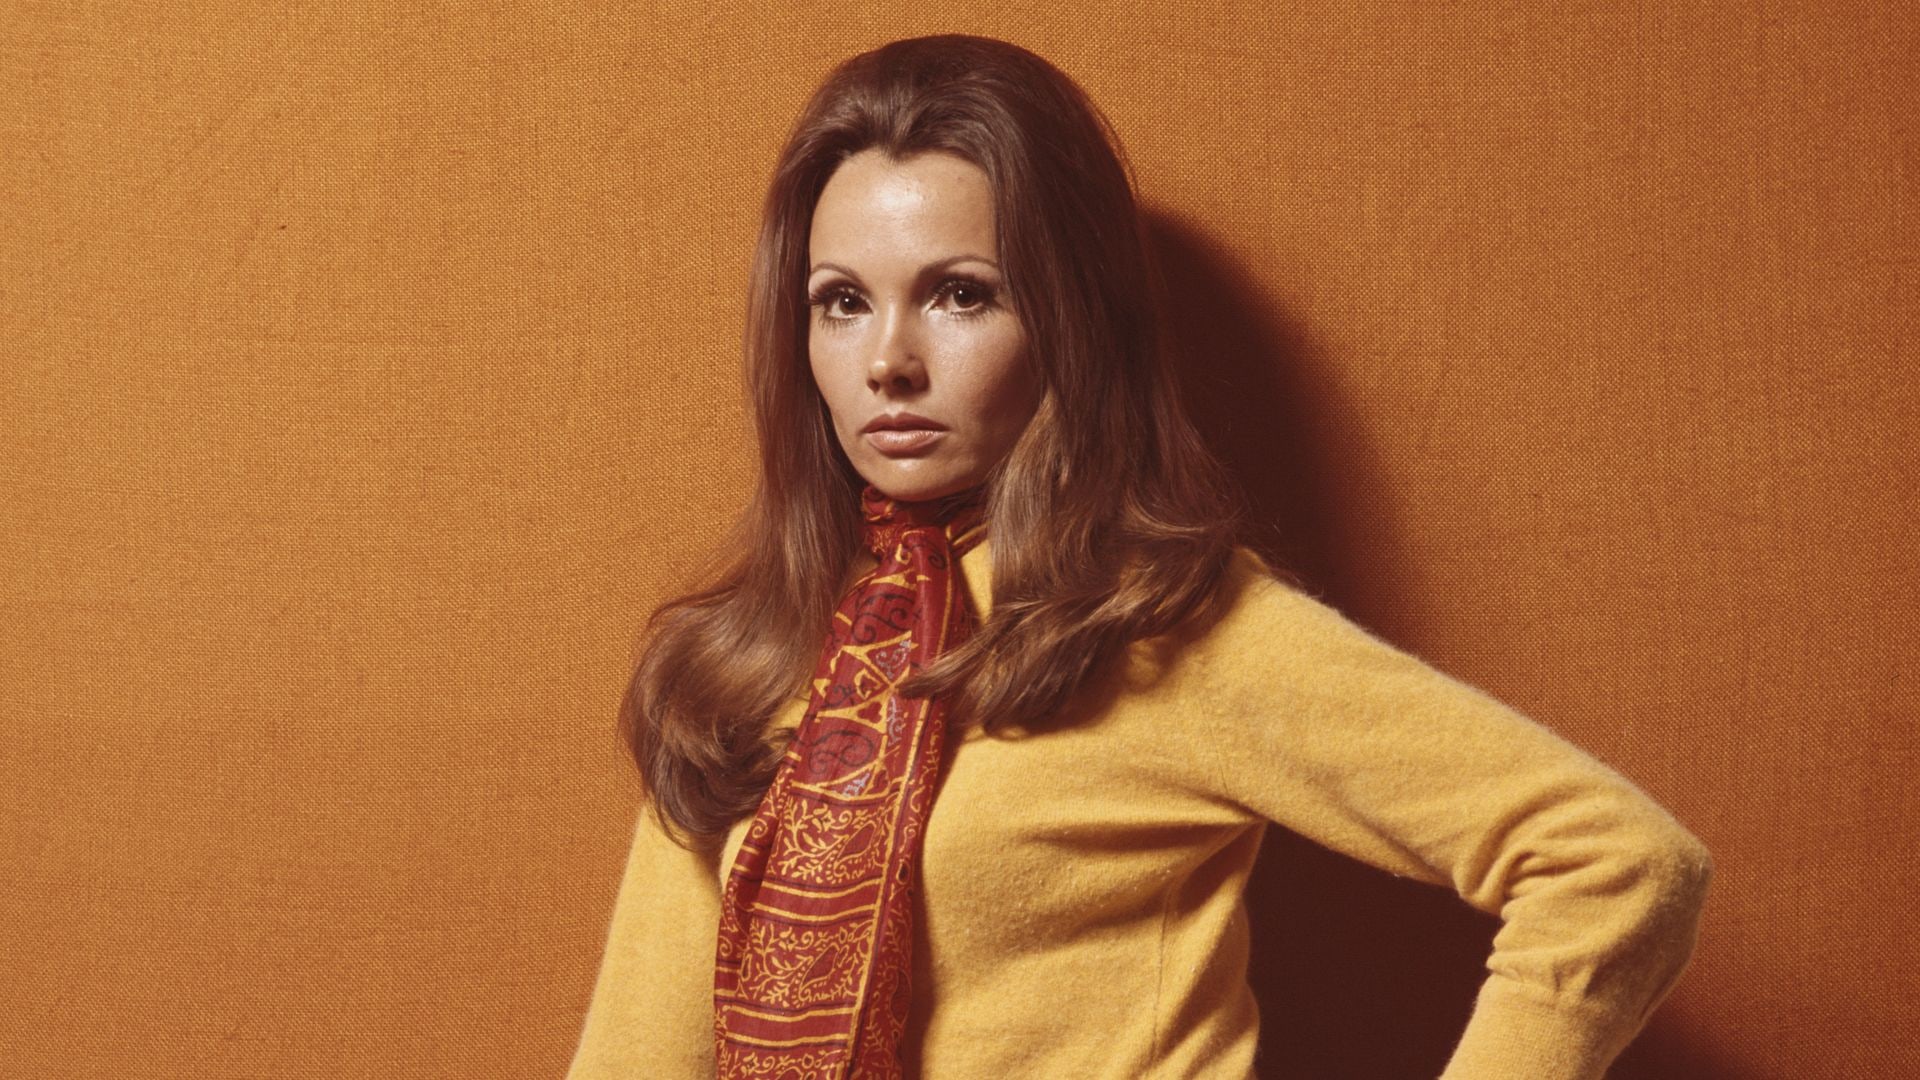 How to Style This Season's '70s Trend